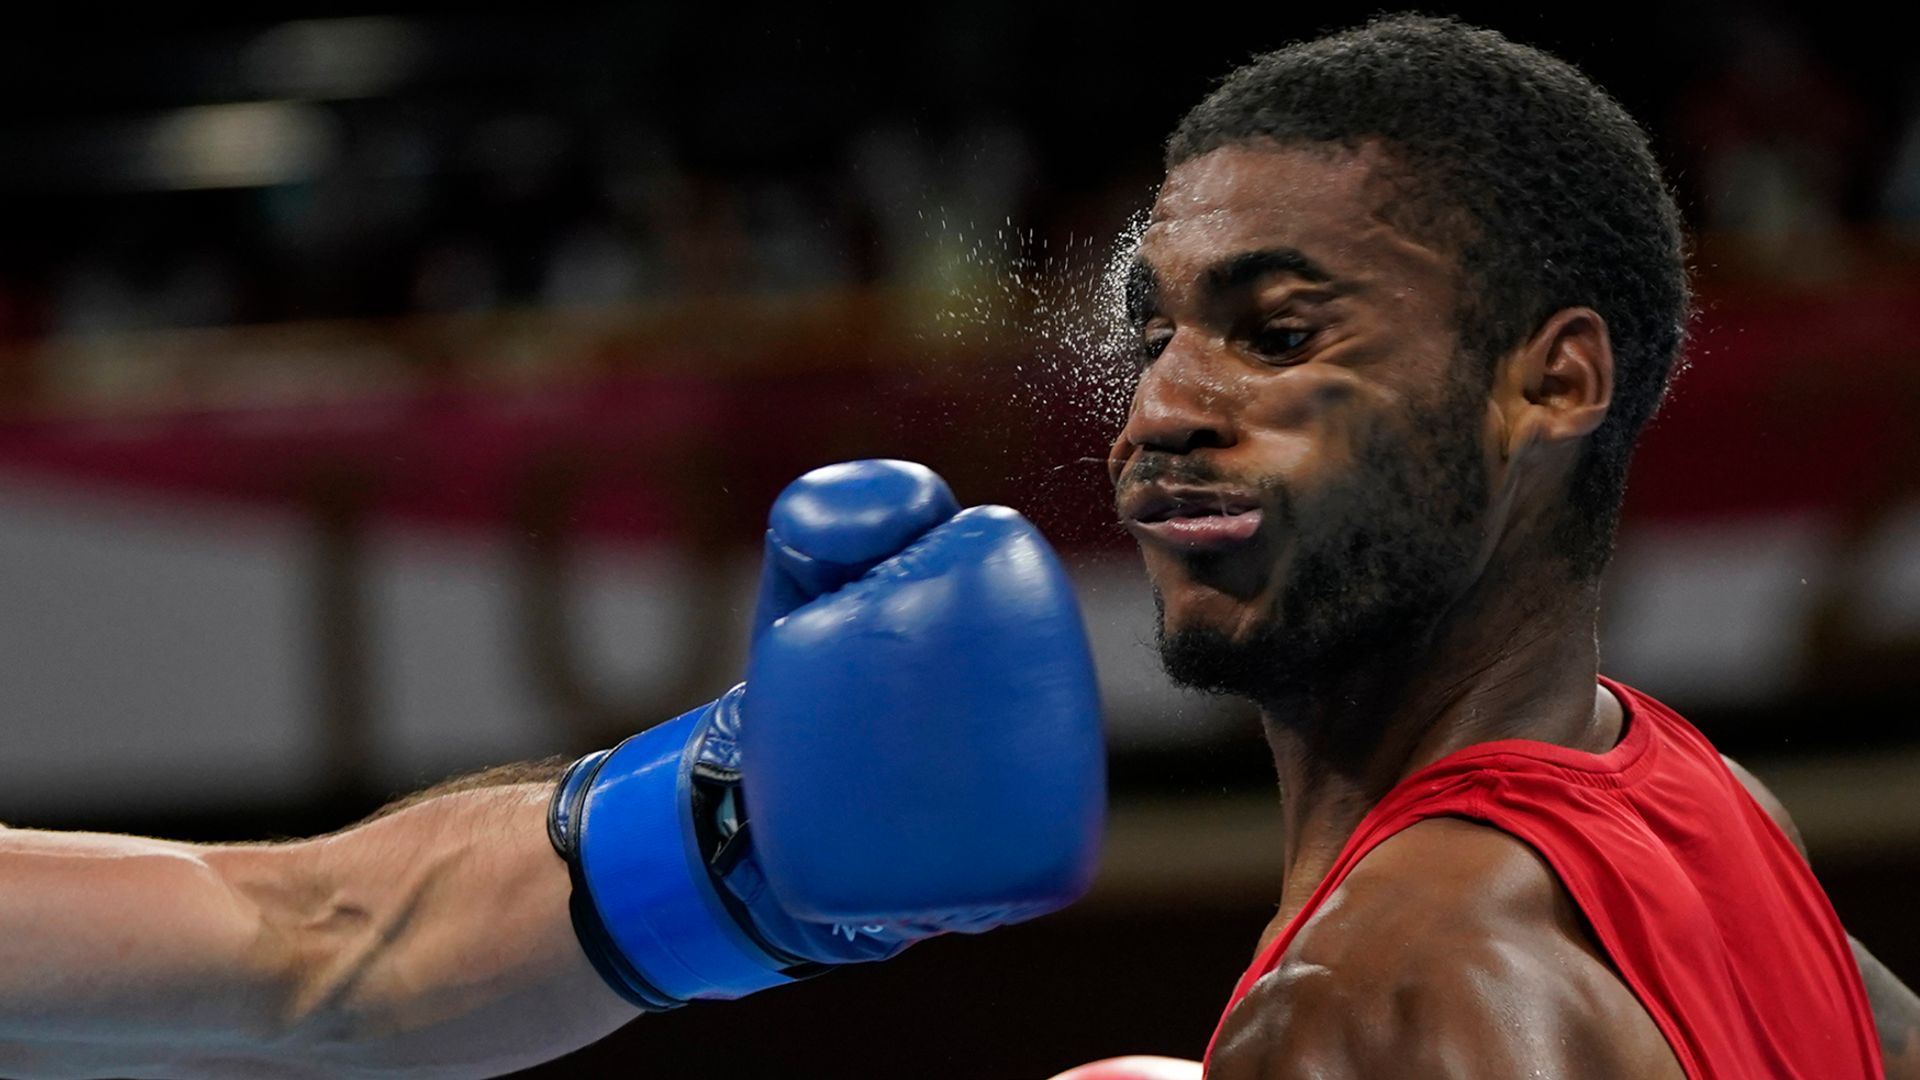 Olympic boxing at maximum risk: 'The clock is ticking'